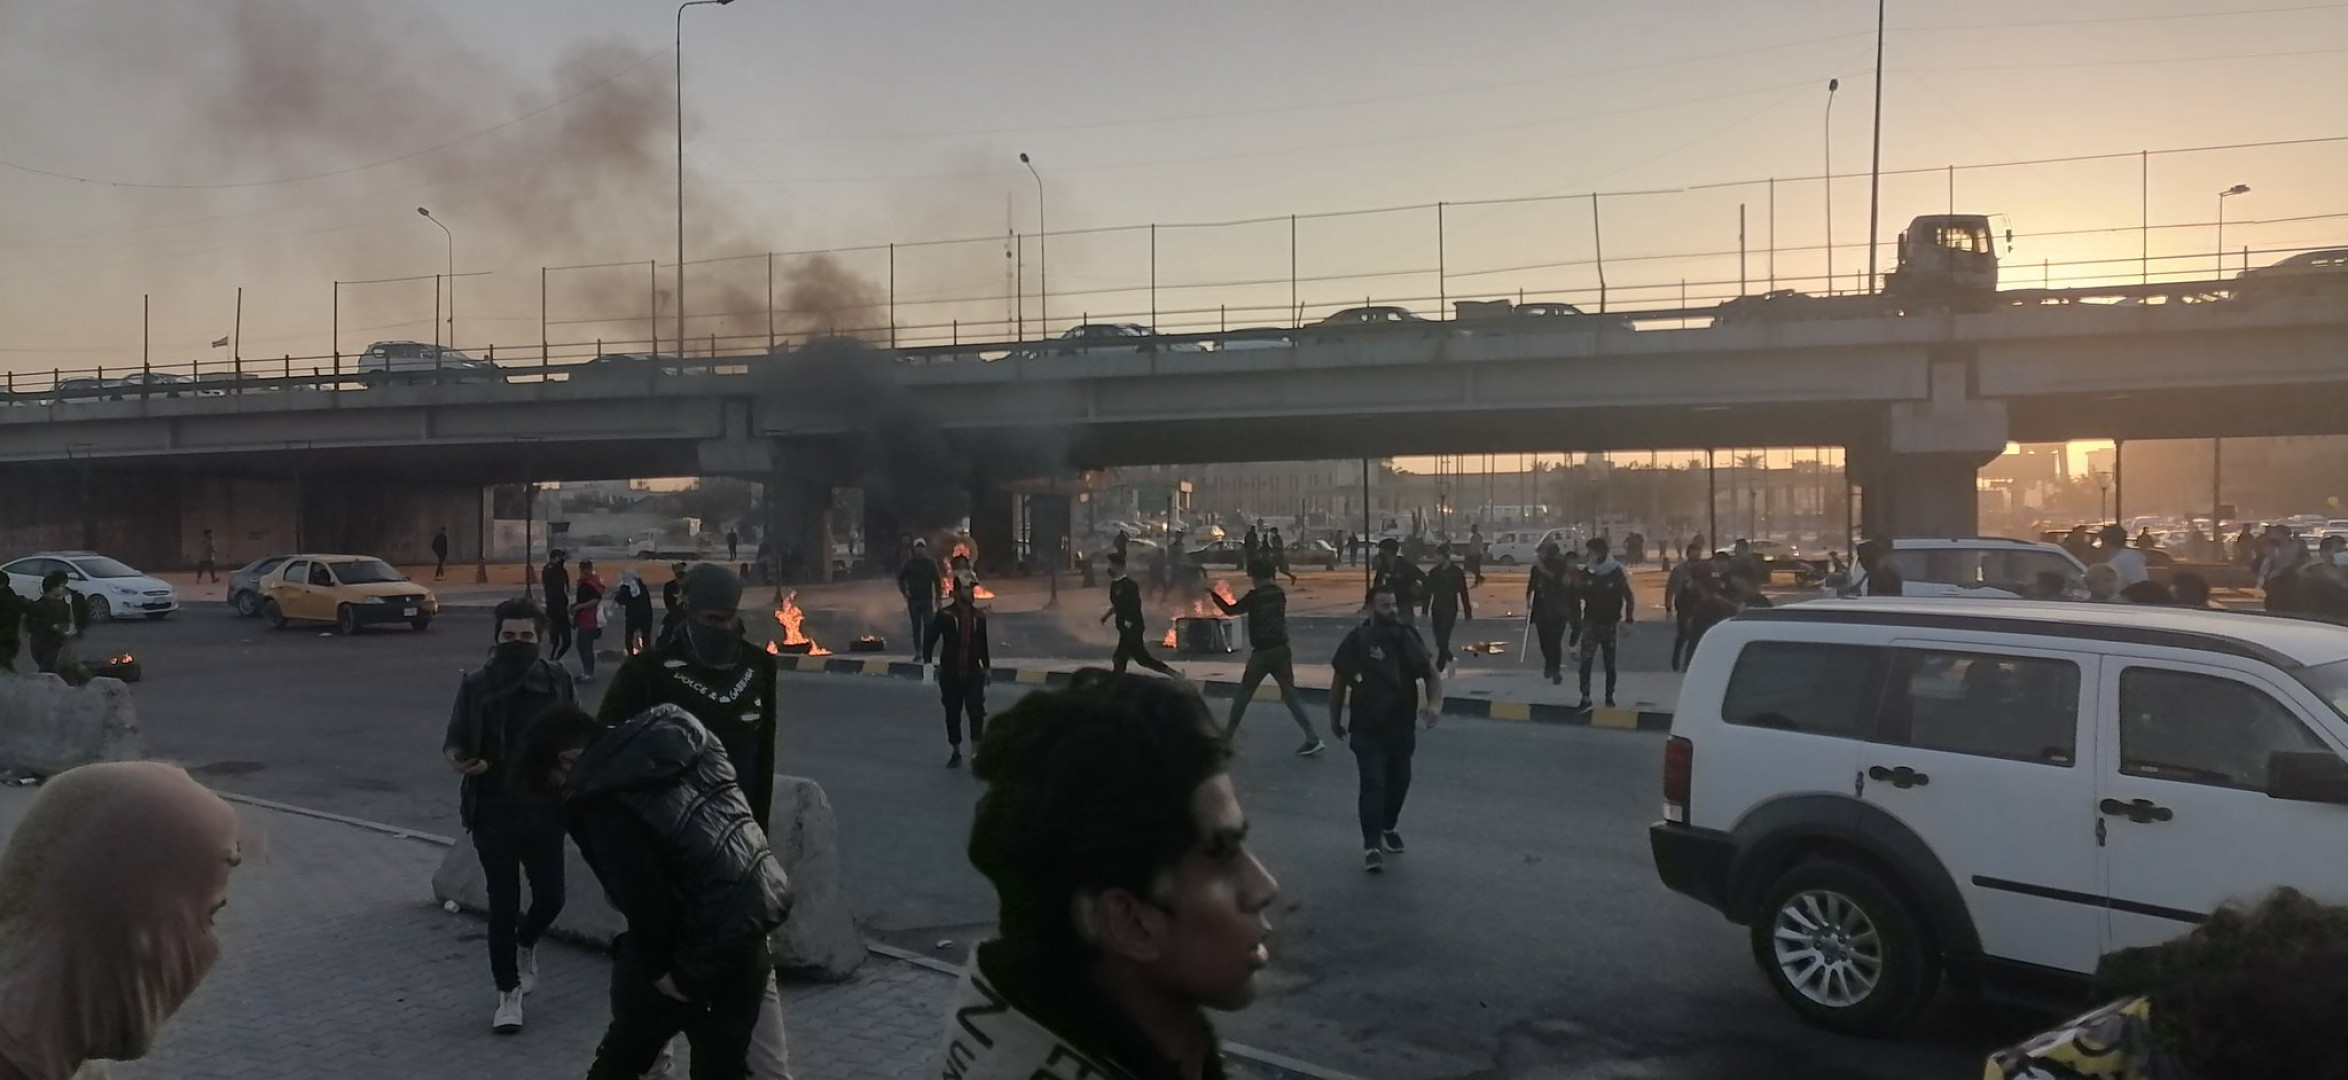 33 injuries and one policeman dead in al-Haboubi clashes